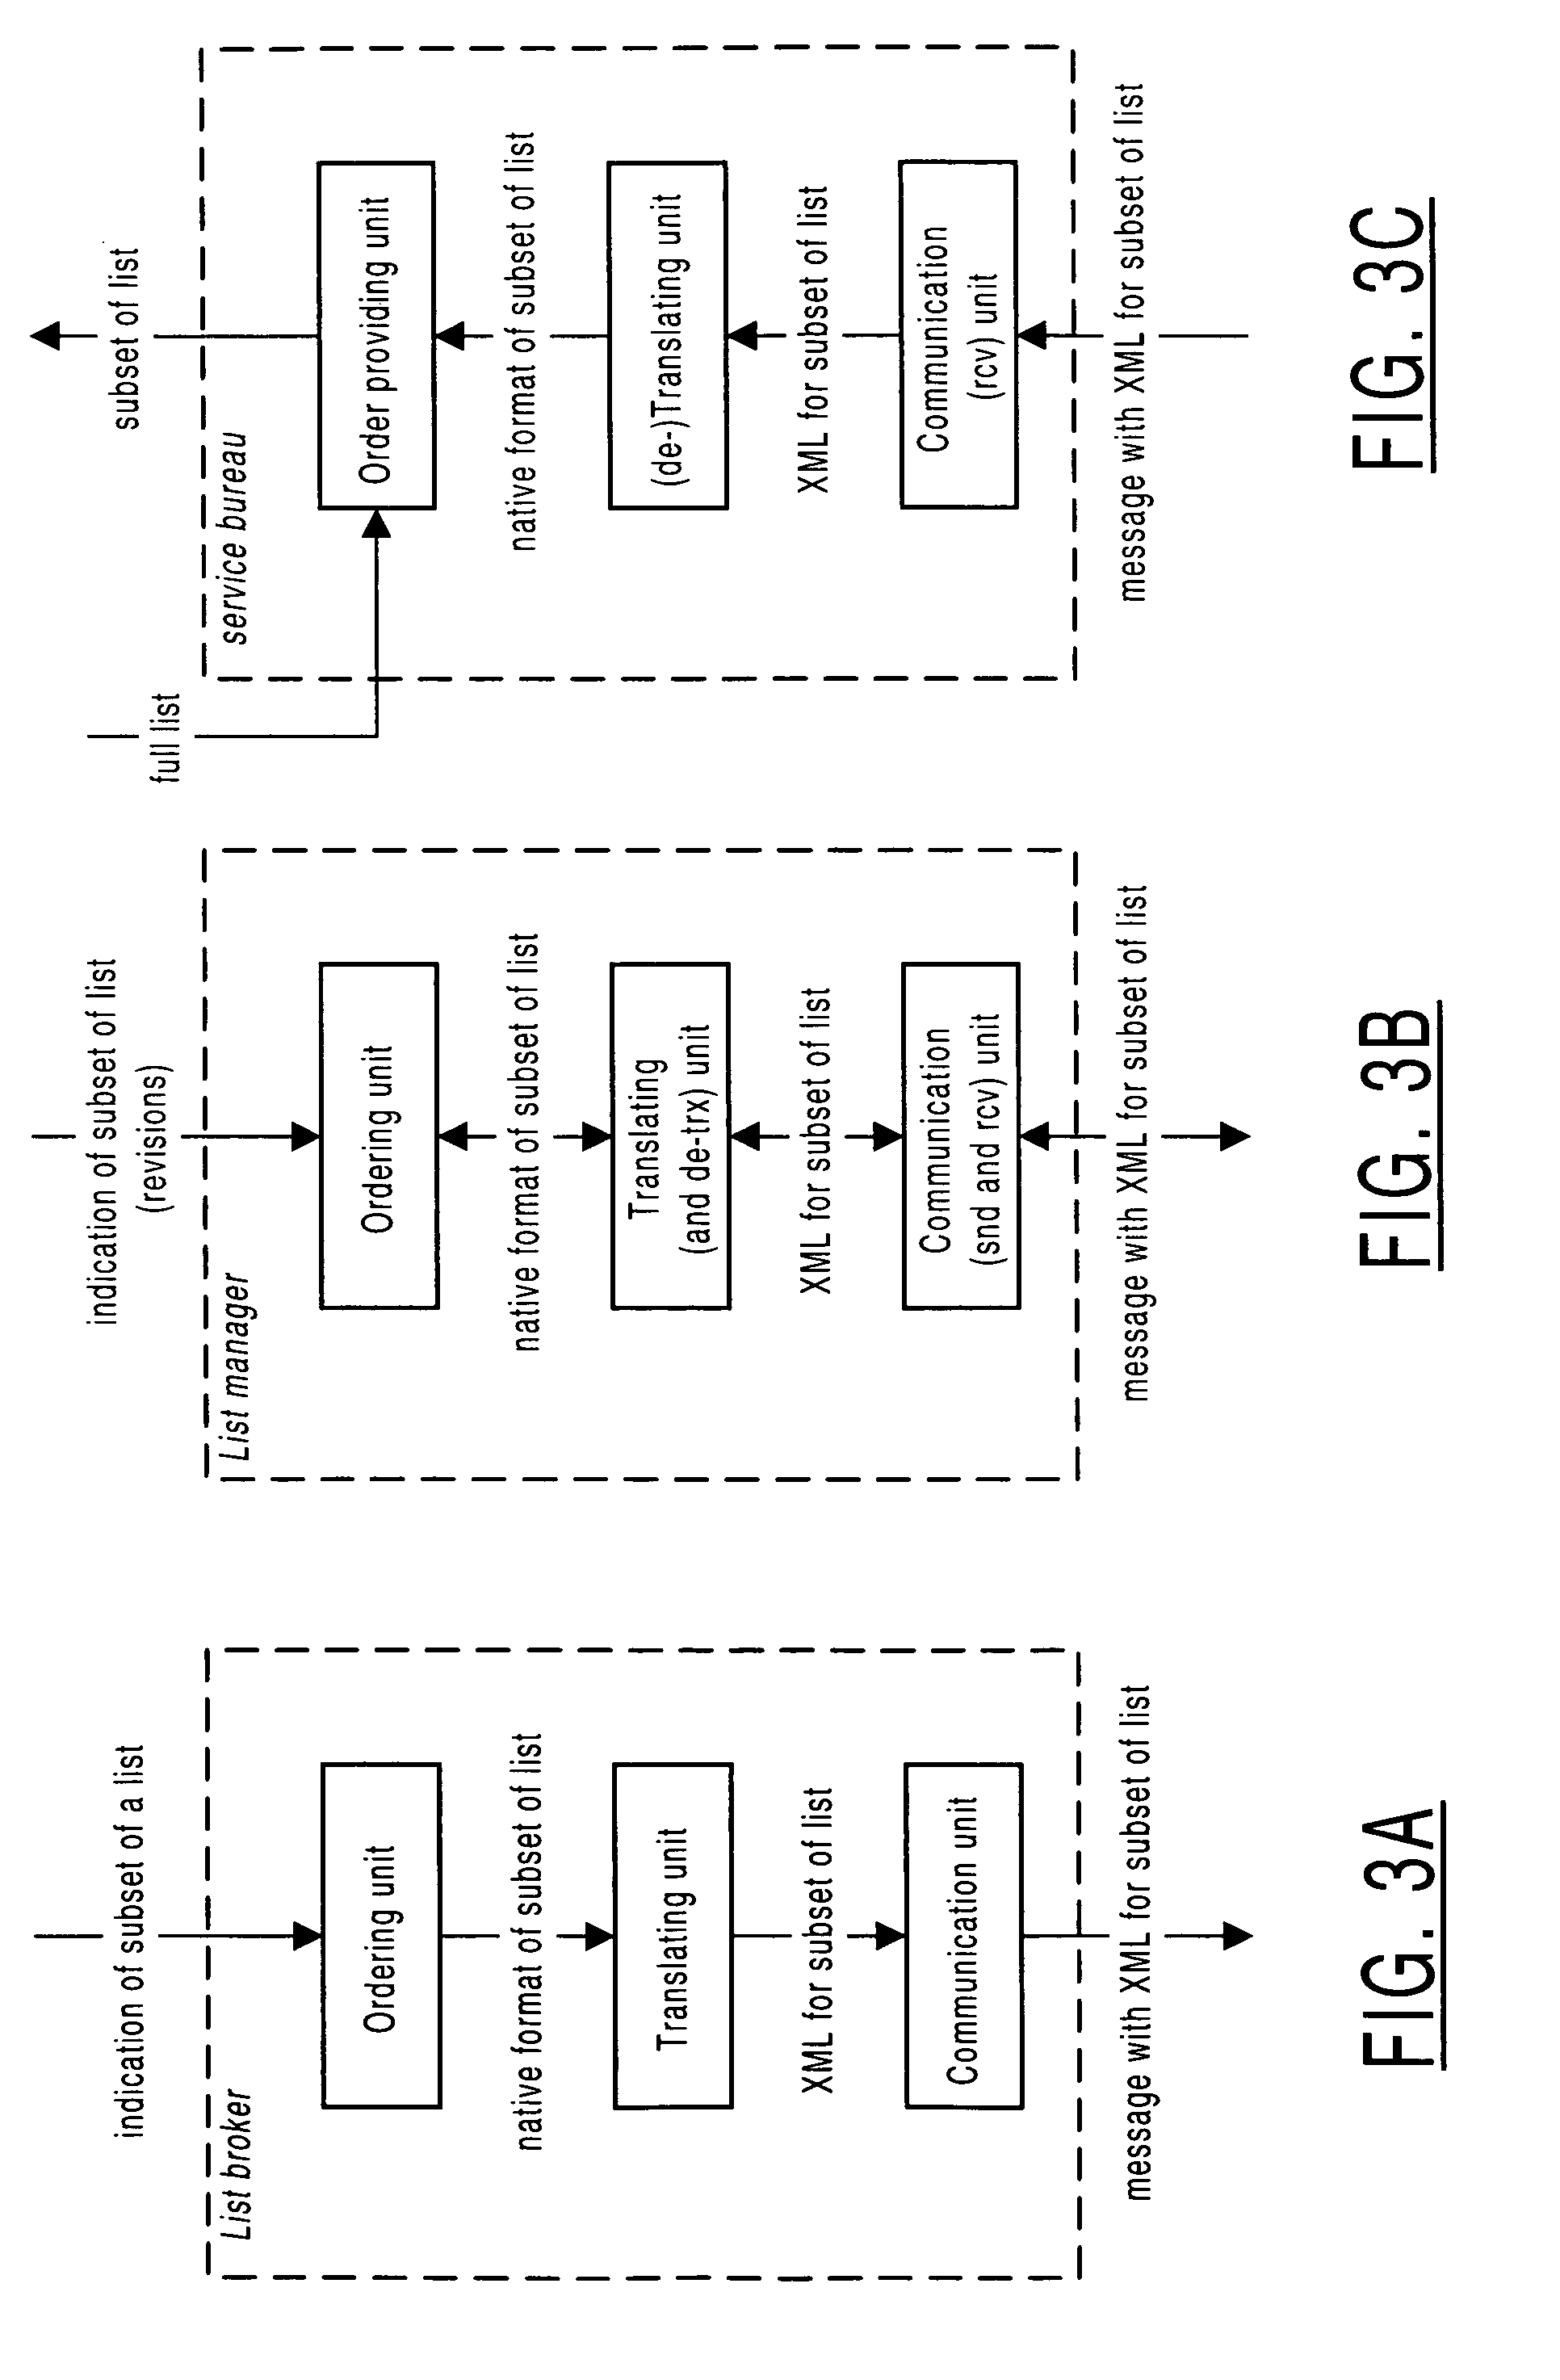 Method and apparatus for communicating list orders